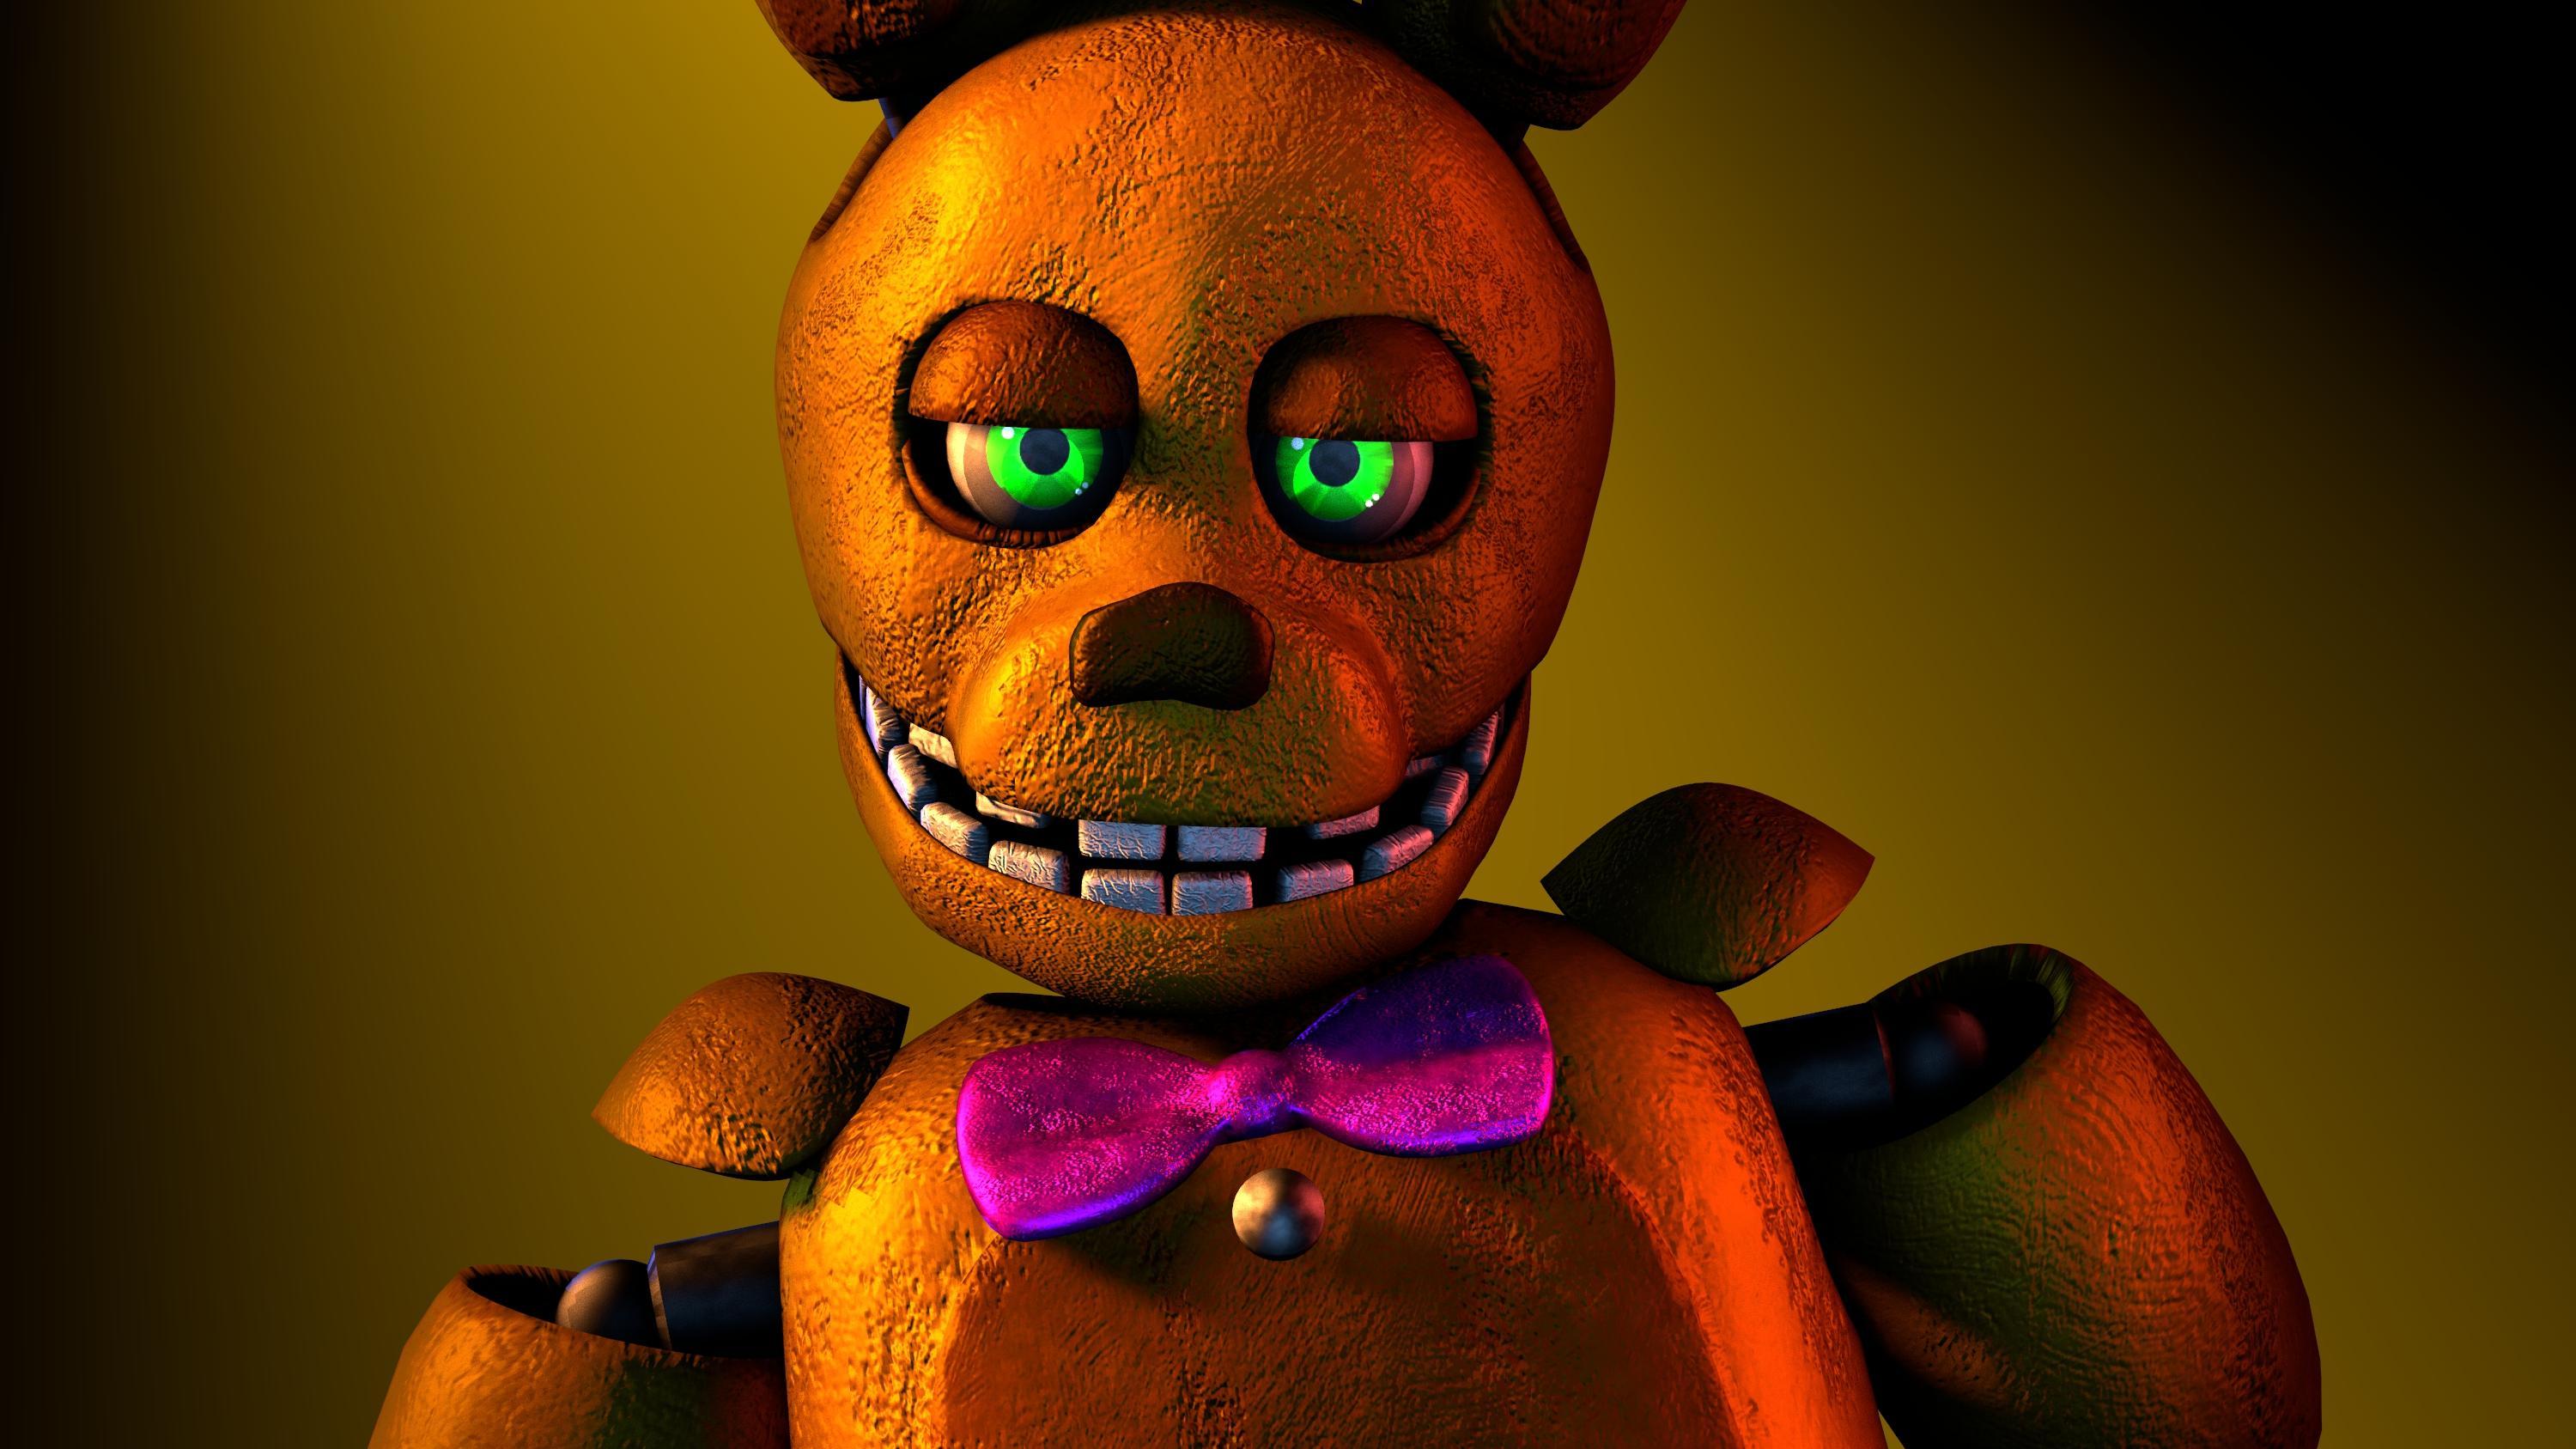 Spring Bonnie Wallpapers - Wallpaper Cave.